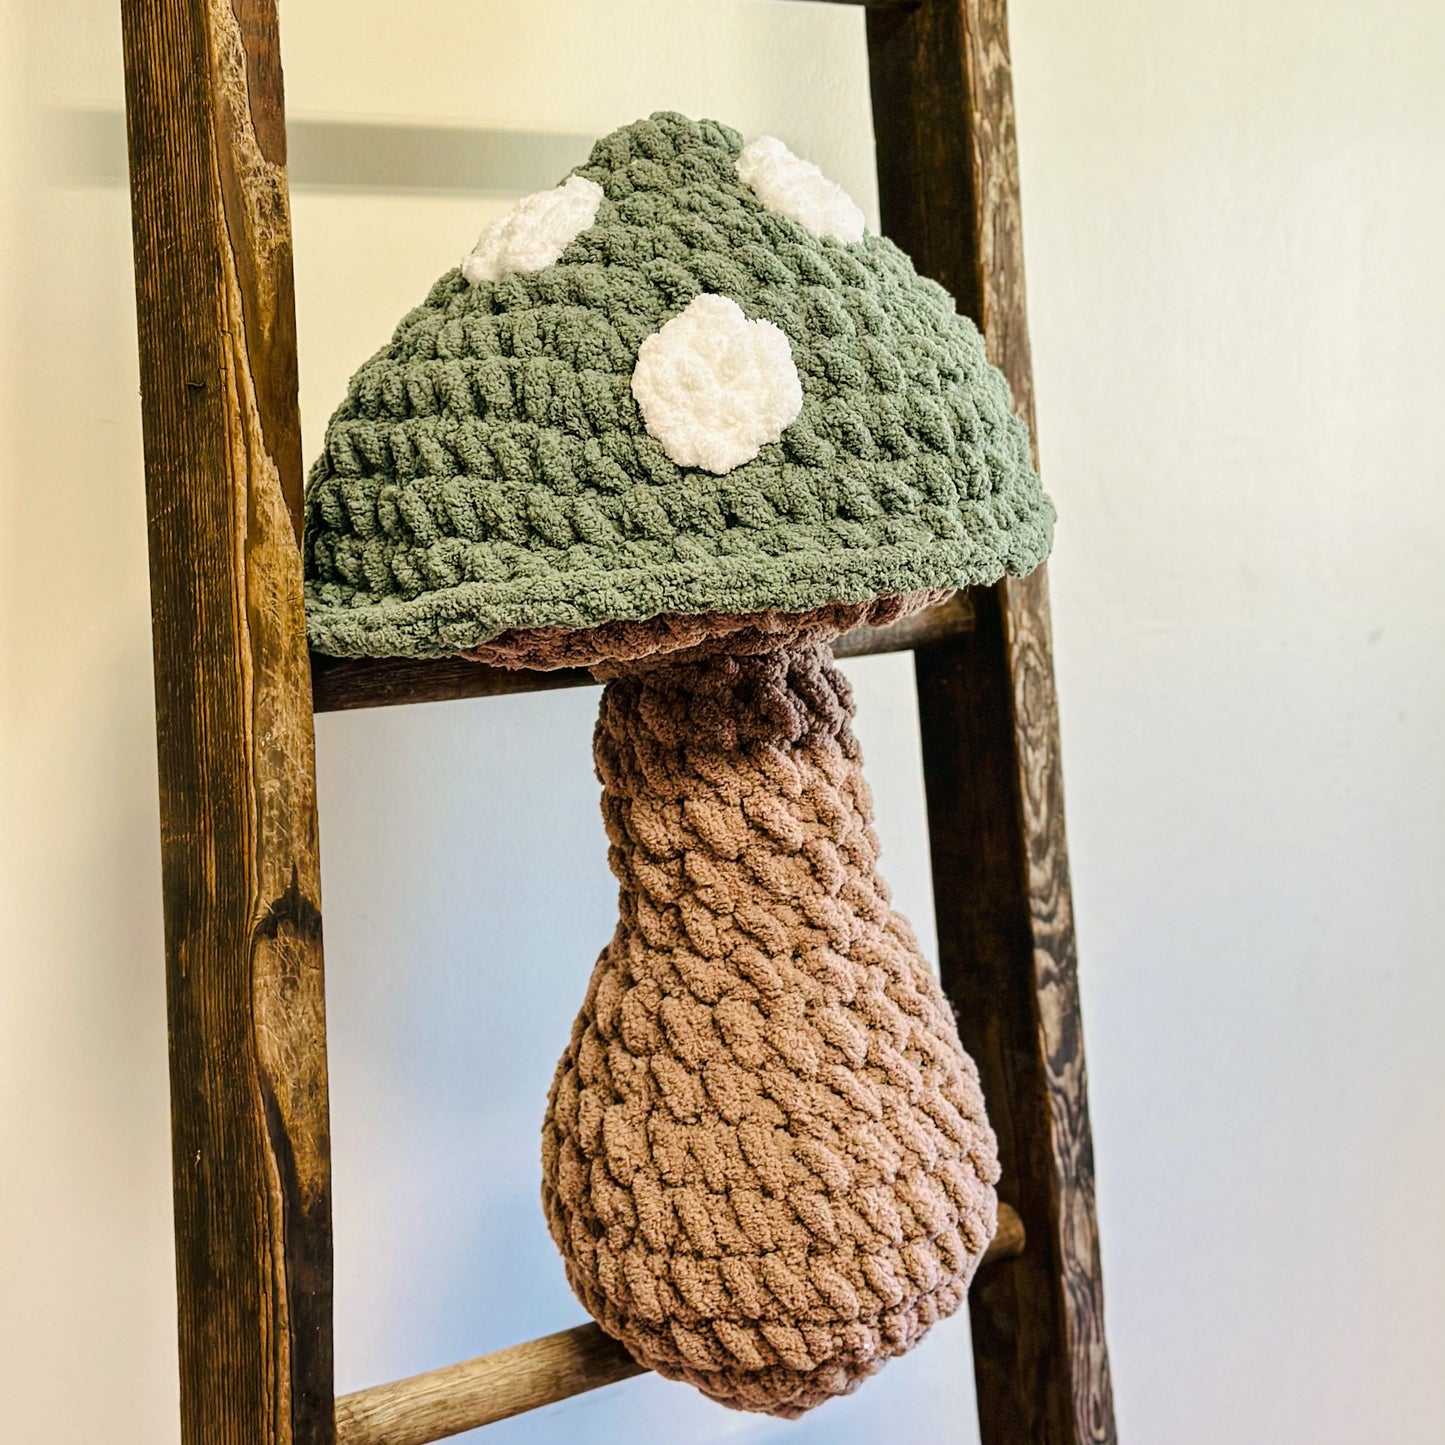 green mushroom cap with white spots and brown stem on a ladder